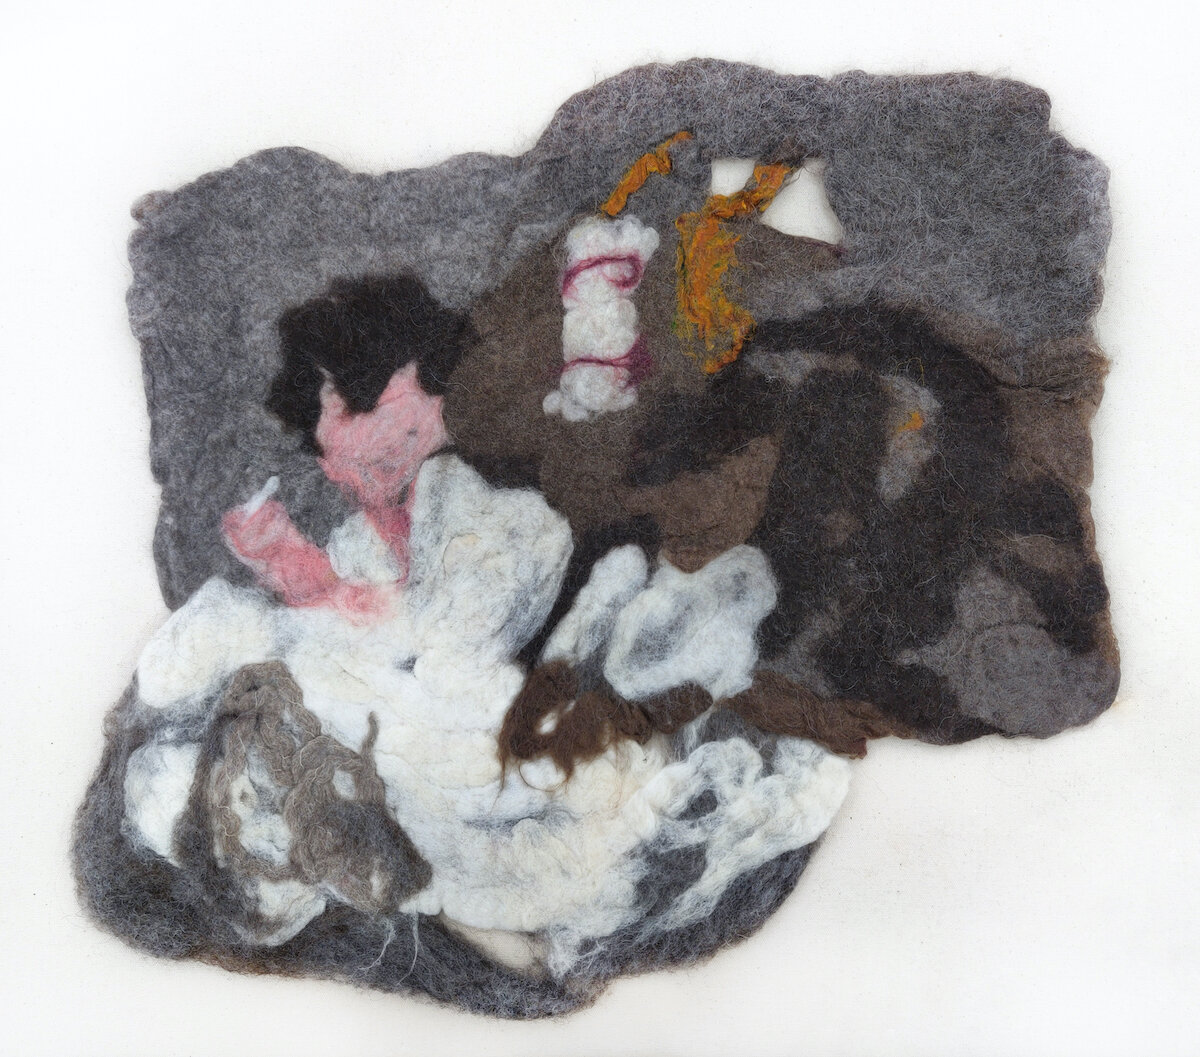 After Thanksgiving, St. Marys PA 1983, 2020. Wet felted wool and sari silk, 22 x 22 inches